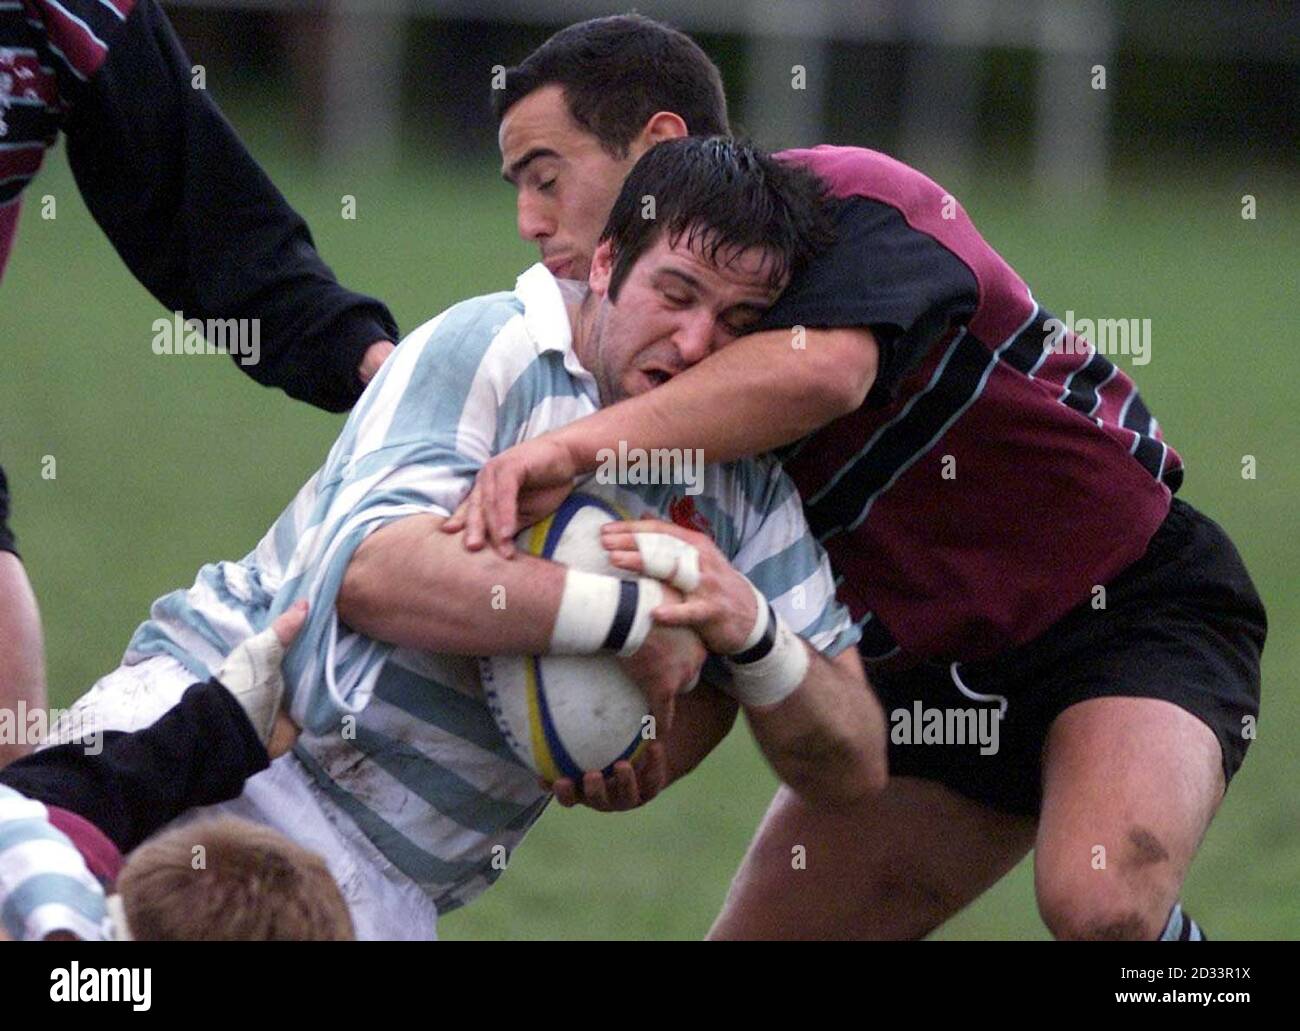 Cambridge University's Des Brett is challenged by Steele-Bodger's Jason Wright (right) during the 54th annual game between Cambridge University and Steele-Bodger at Grange Rd ,Cambridge. * The Steele-Bodger side consists of professional Rugby Union players and competes with the Cambridge University team on an annual basis. Stock Photo